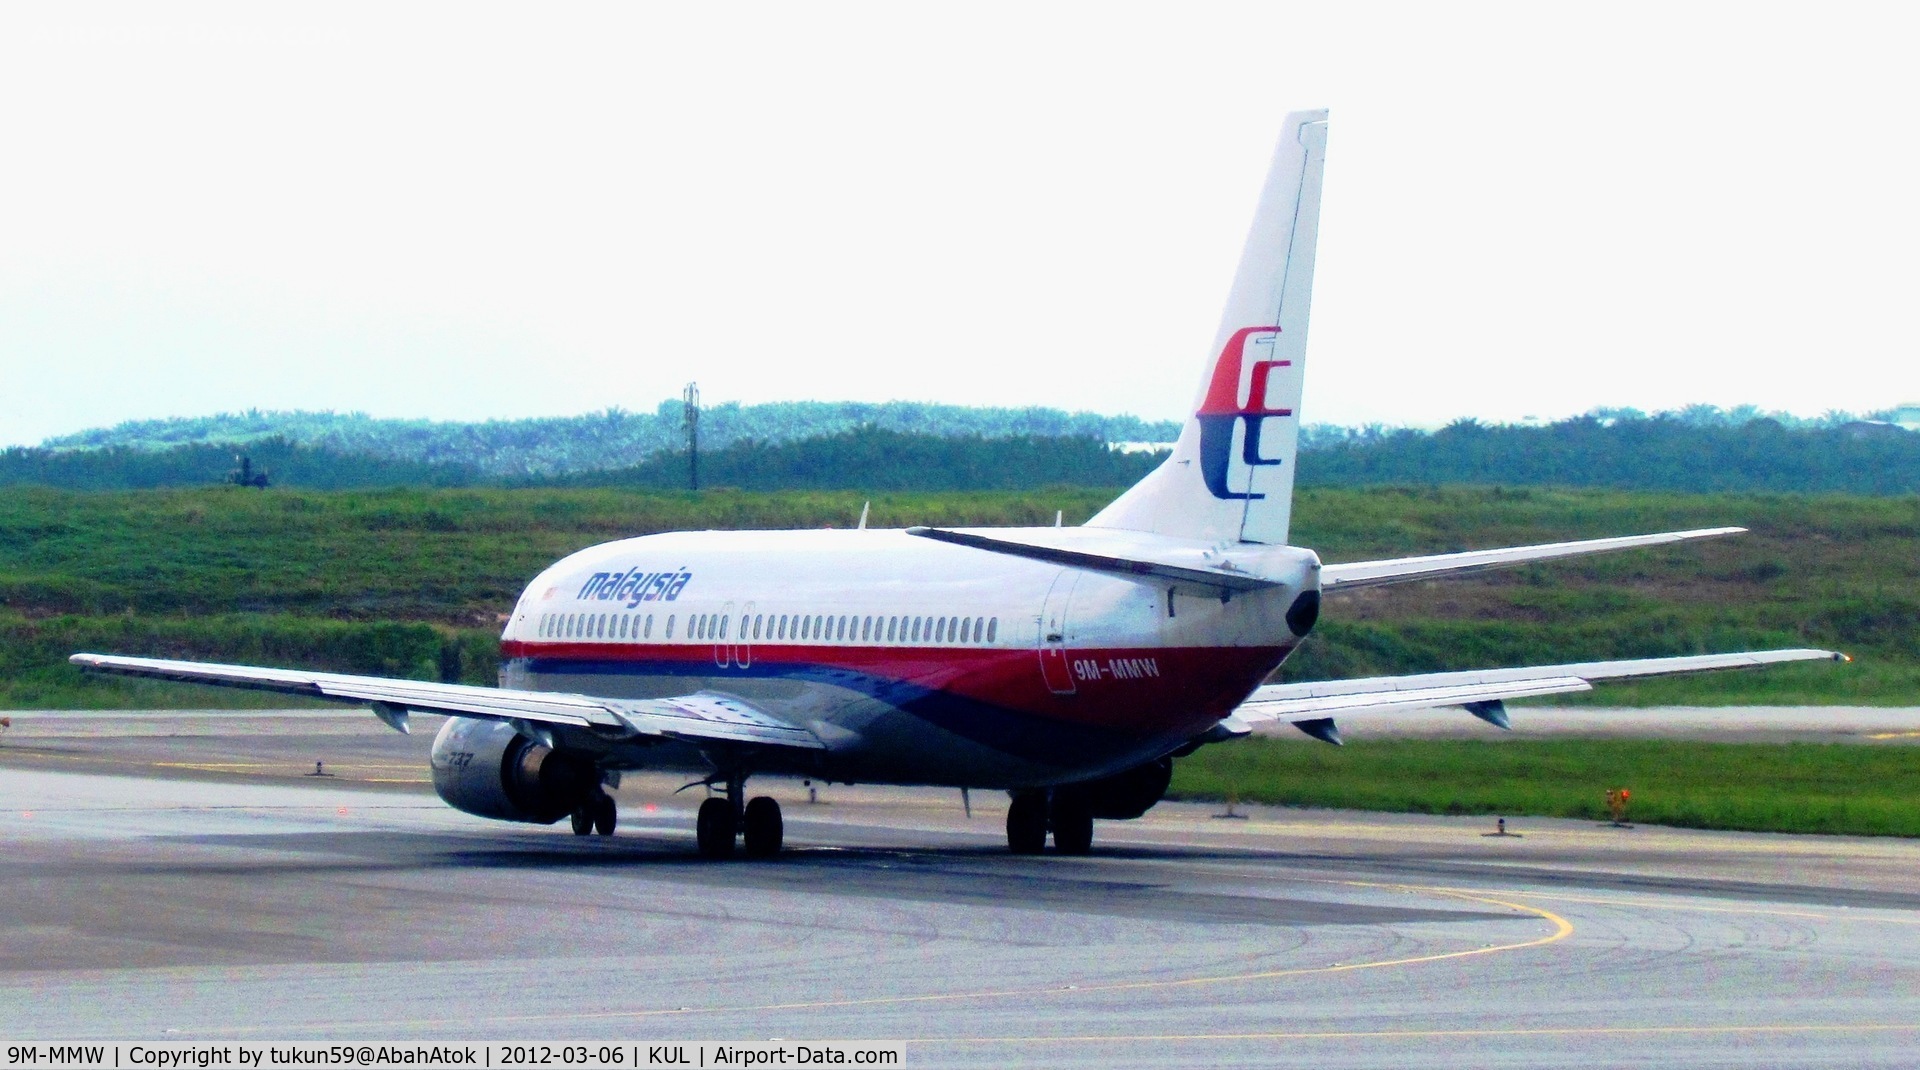 9M-MMW, 1993 Boeing 737-4H6 C/N 26451, Malaysia Airlines